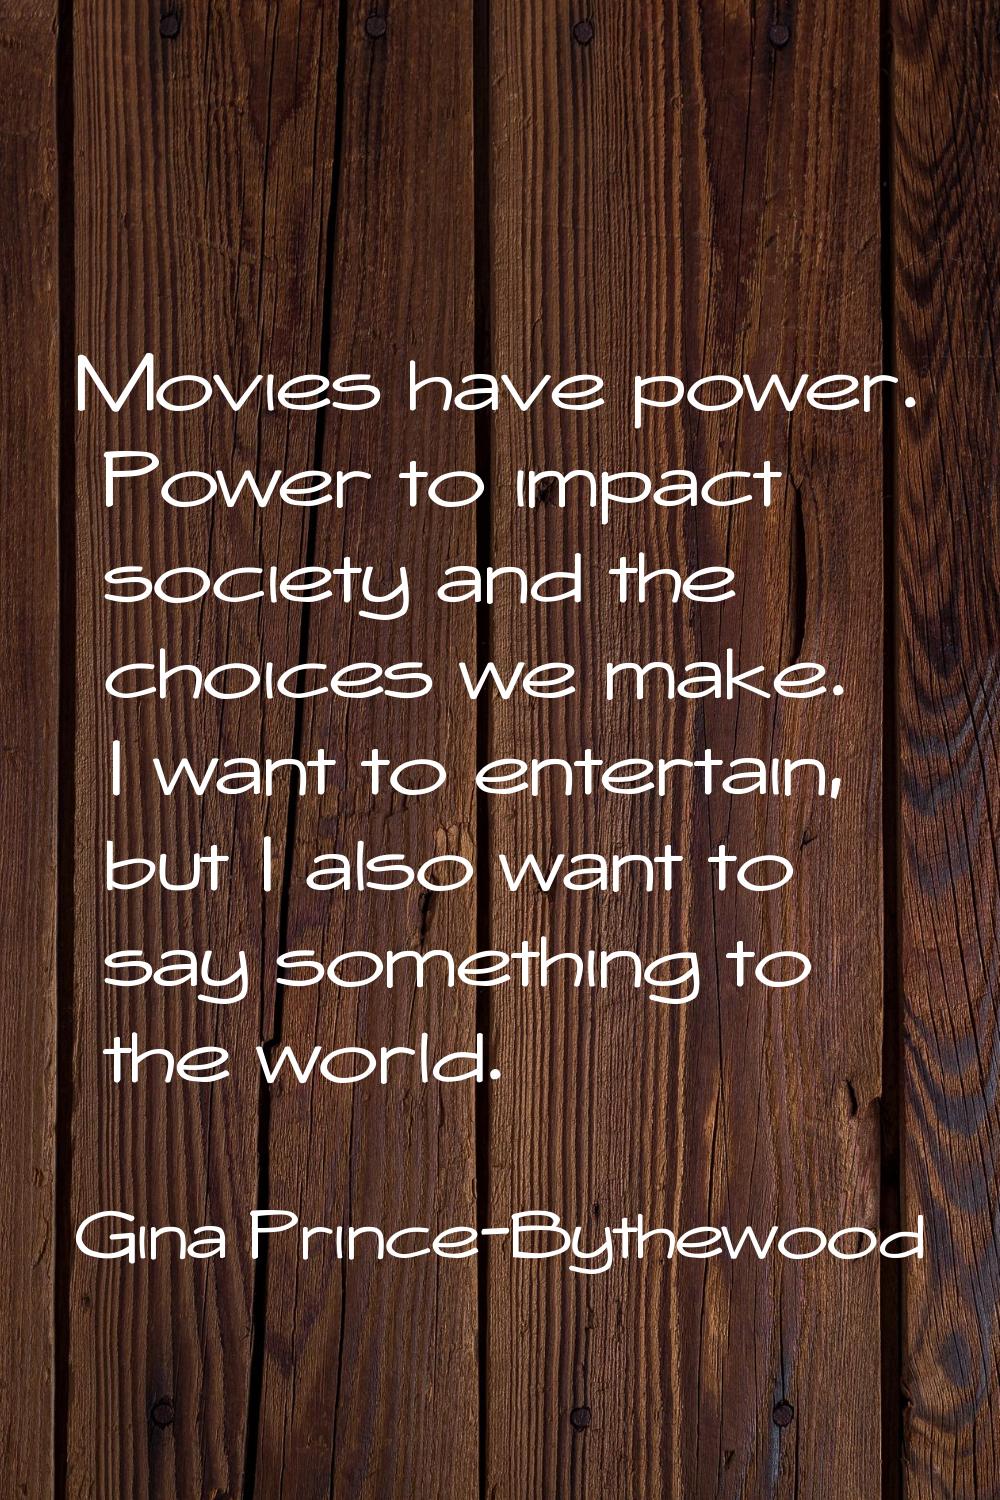 Movies have power. Power to impact society and the choices we make. I want to entertain, but I also